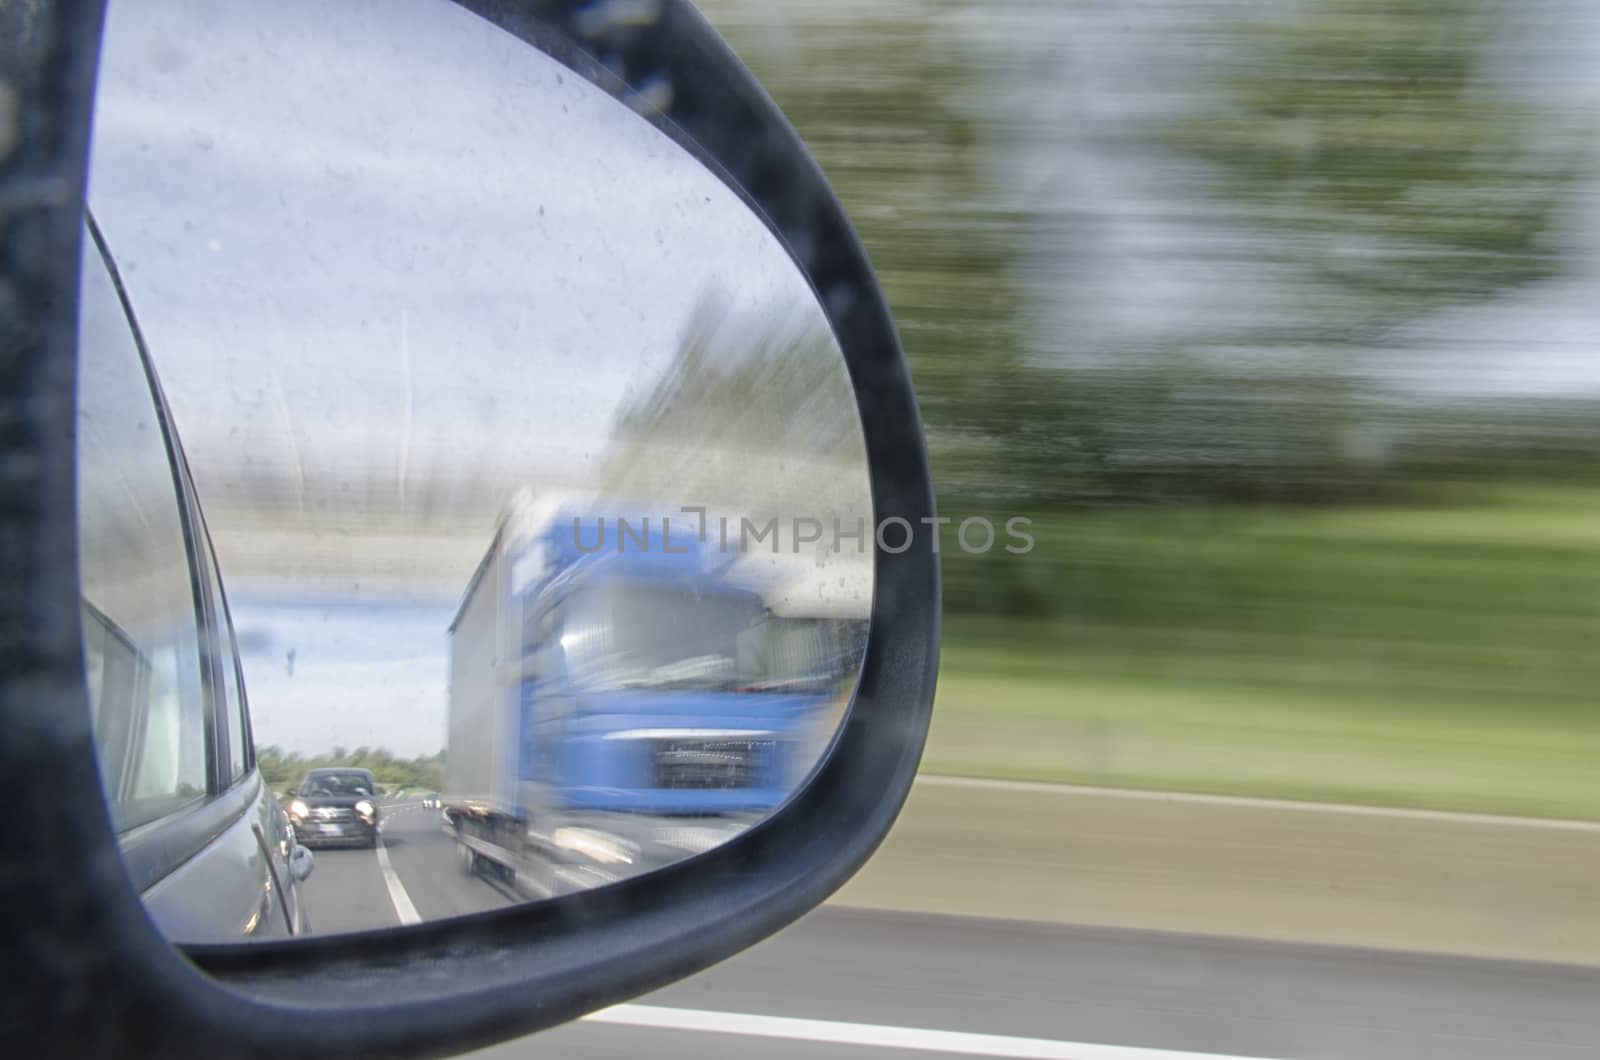 Overtaking a truck seen in the rearview mirror